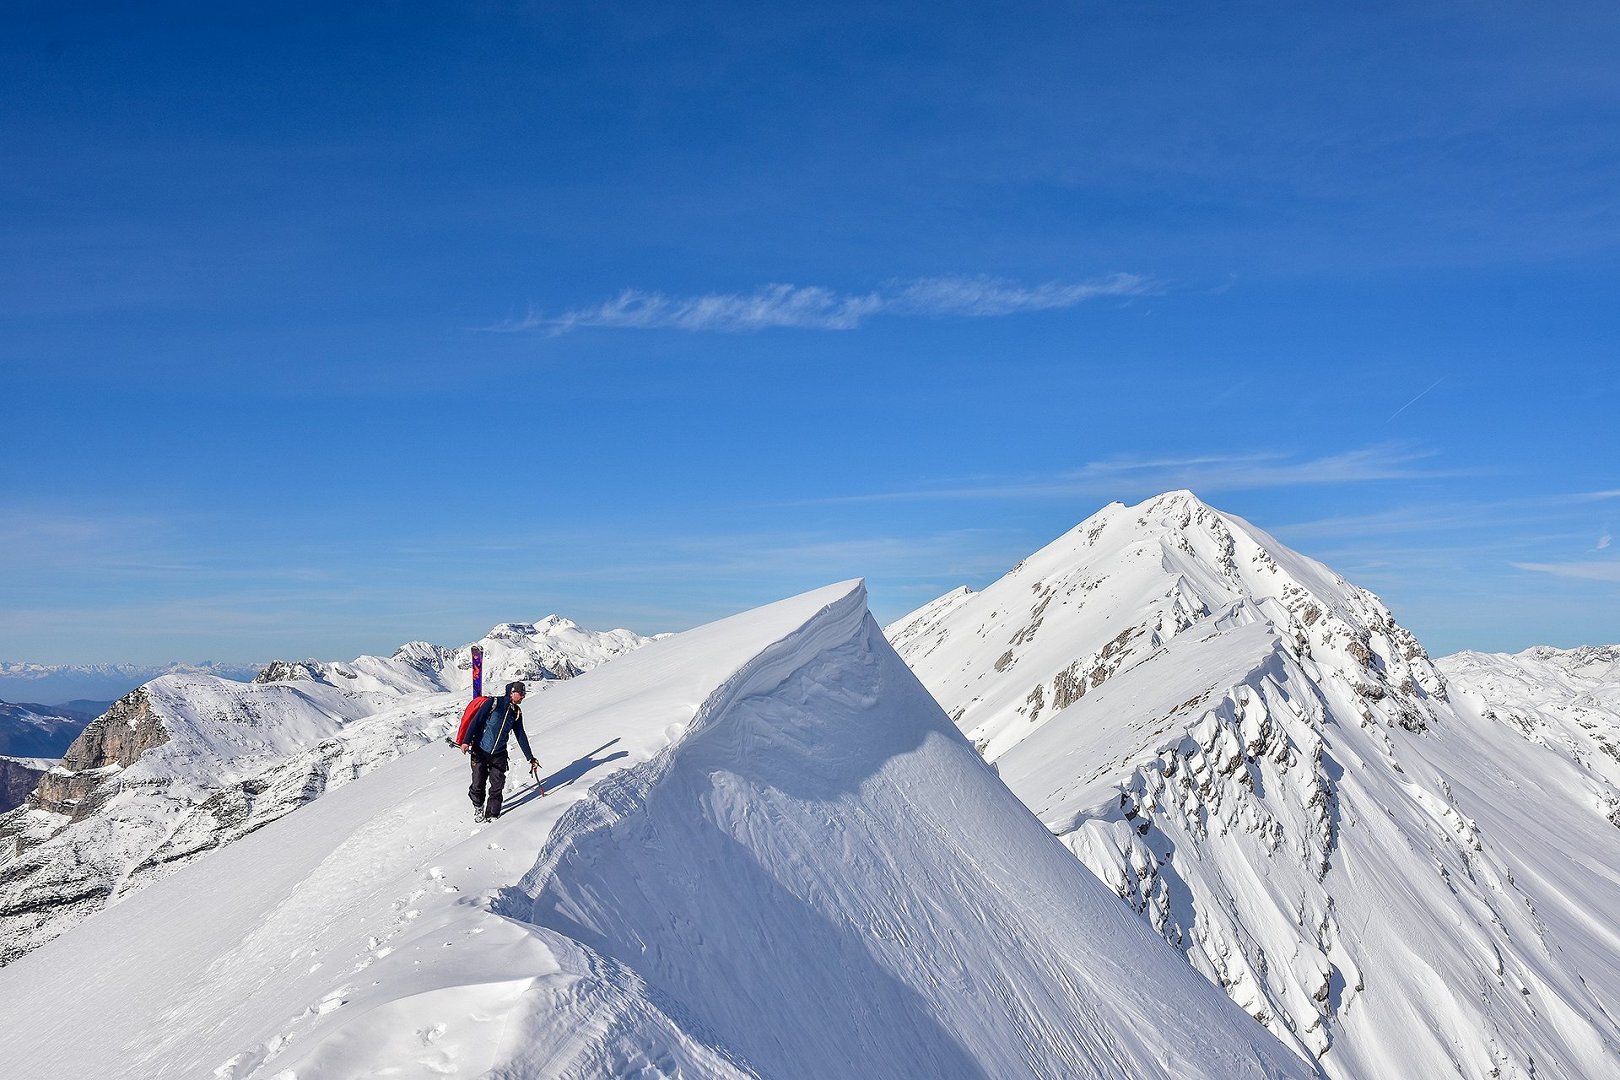 The touring skier enjoys the view at the top of a snowy mountain